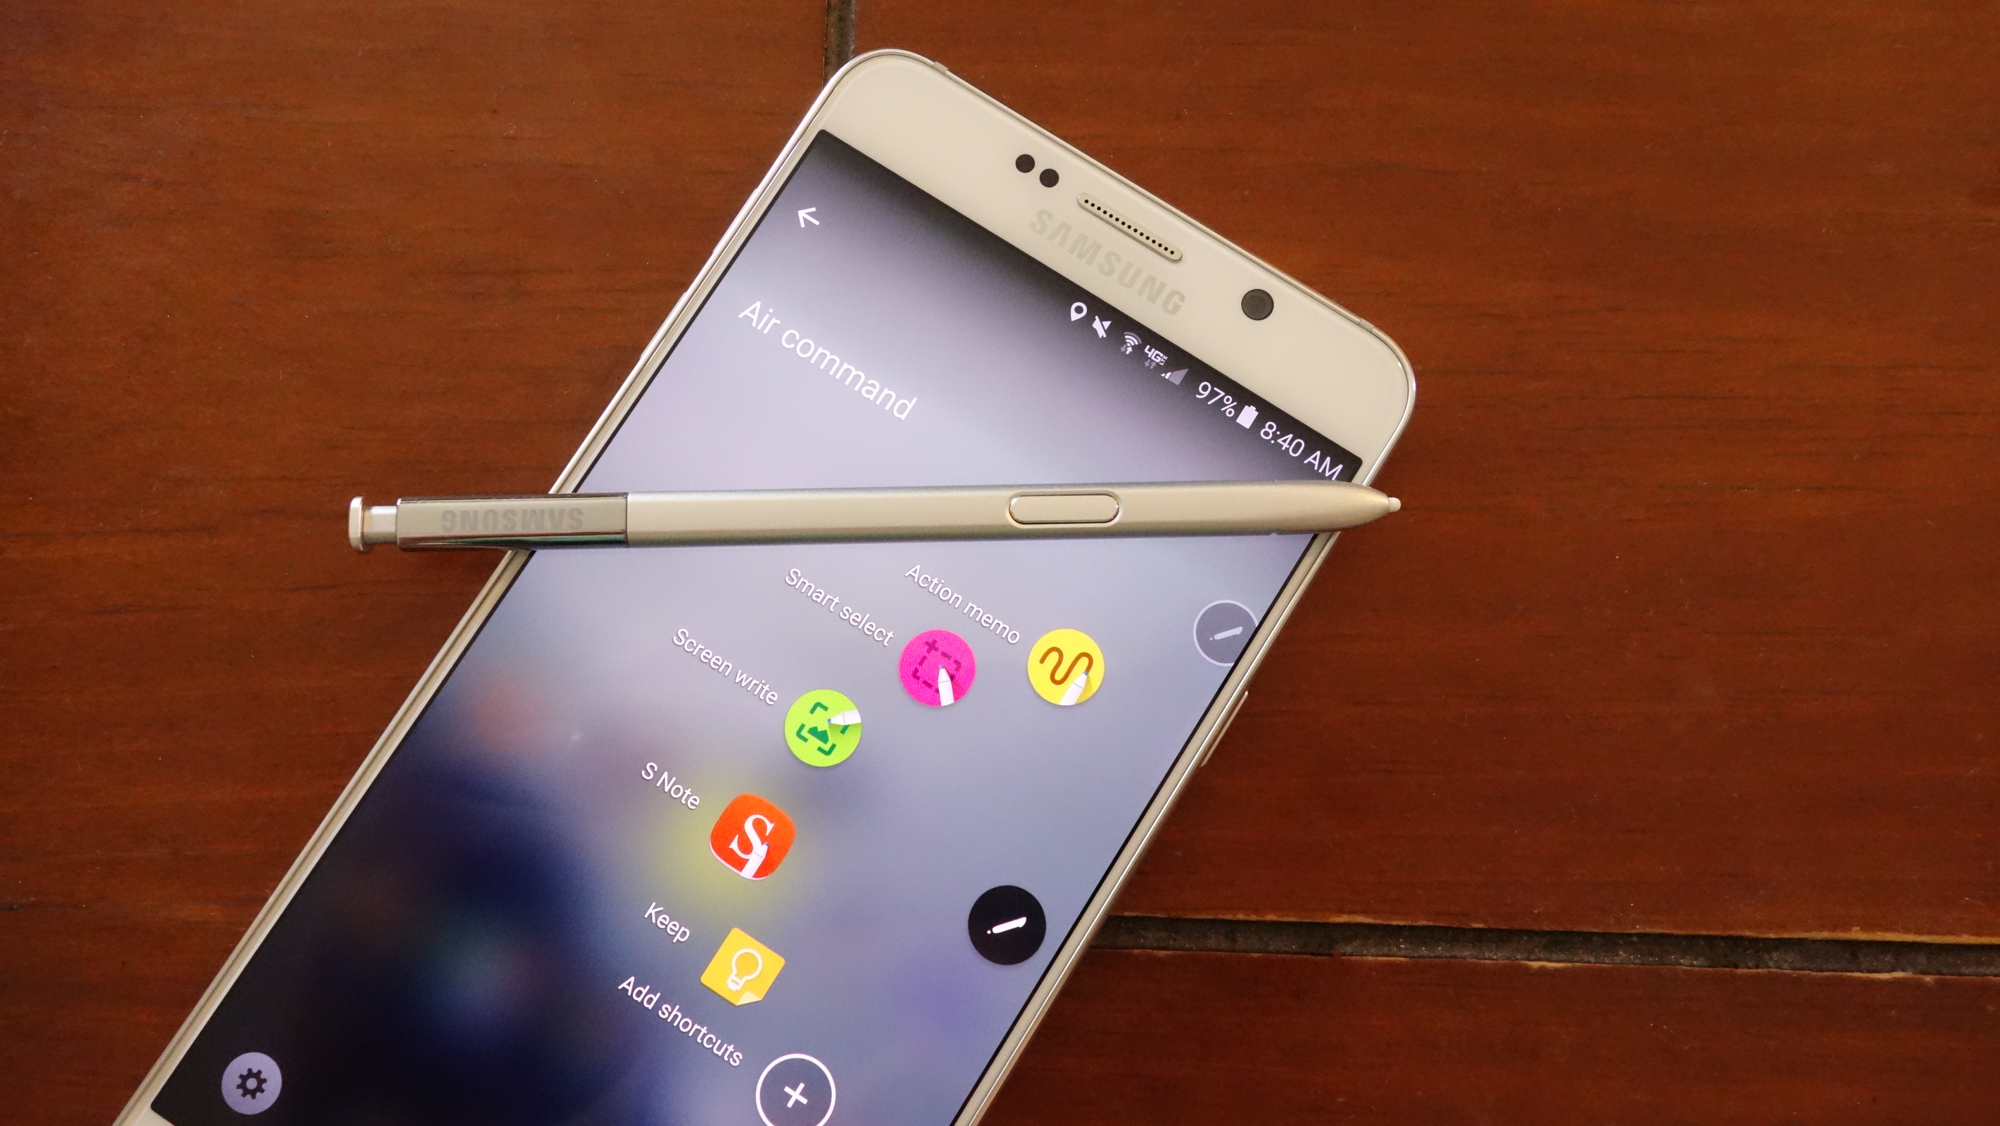 Samsung Galaxy Note5 with S-pen